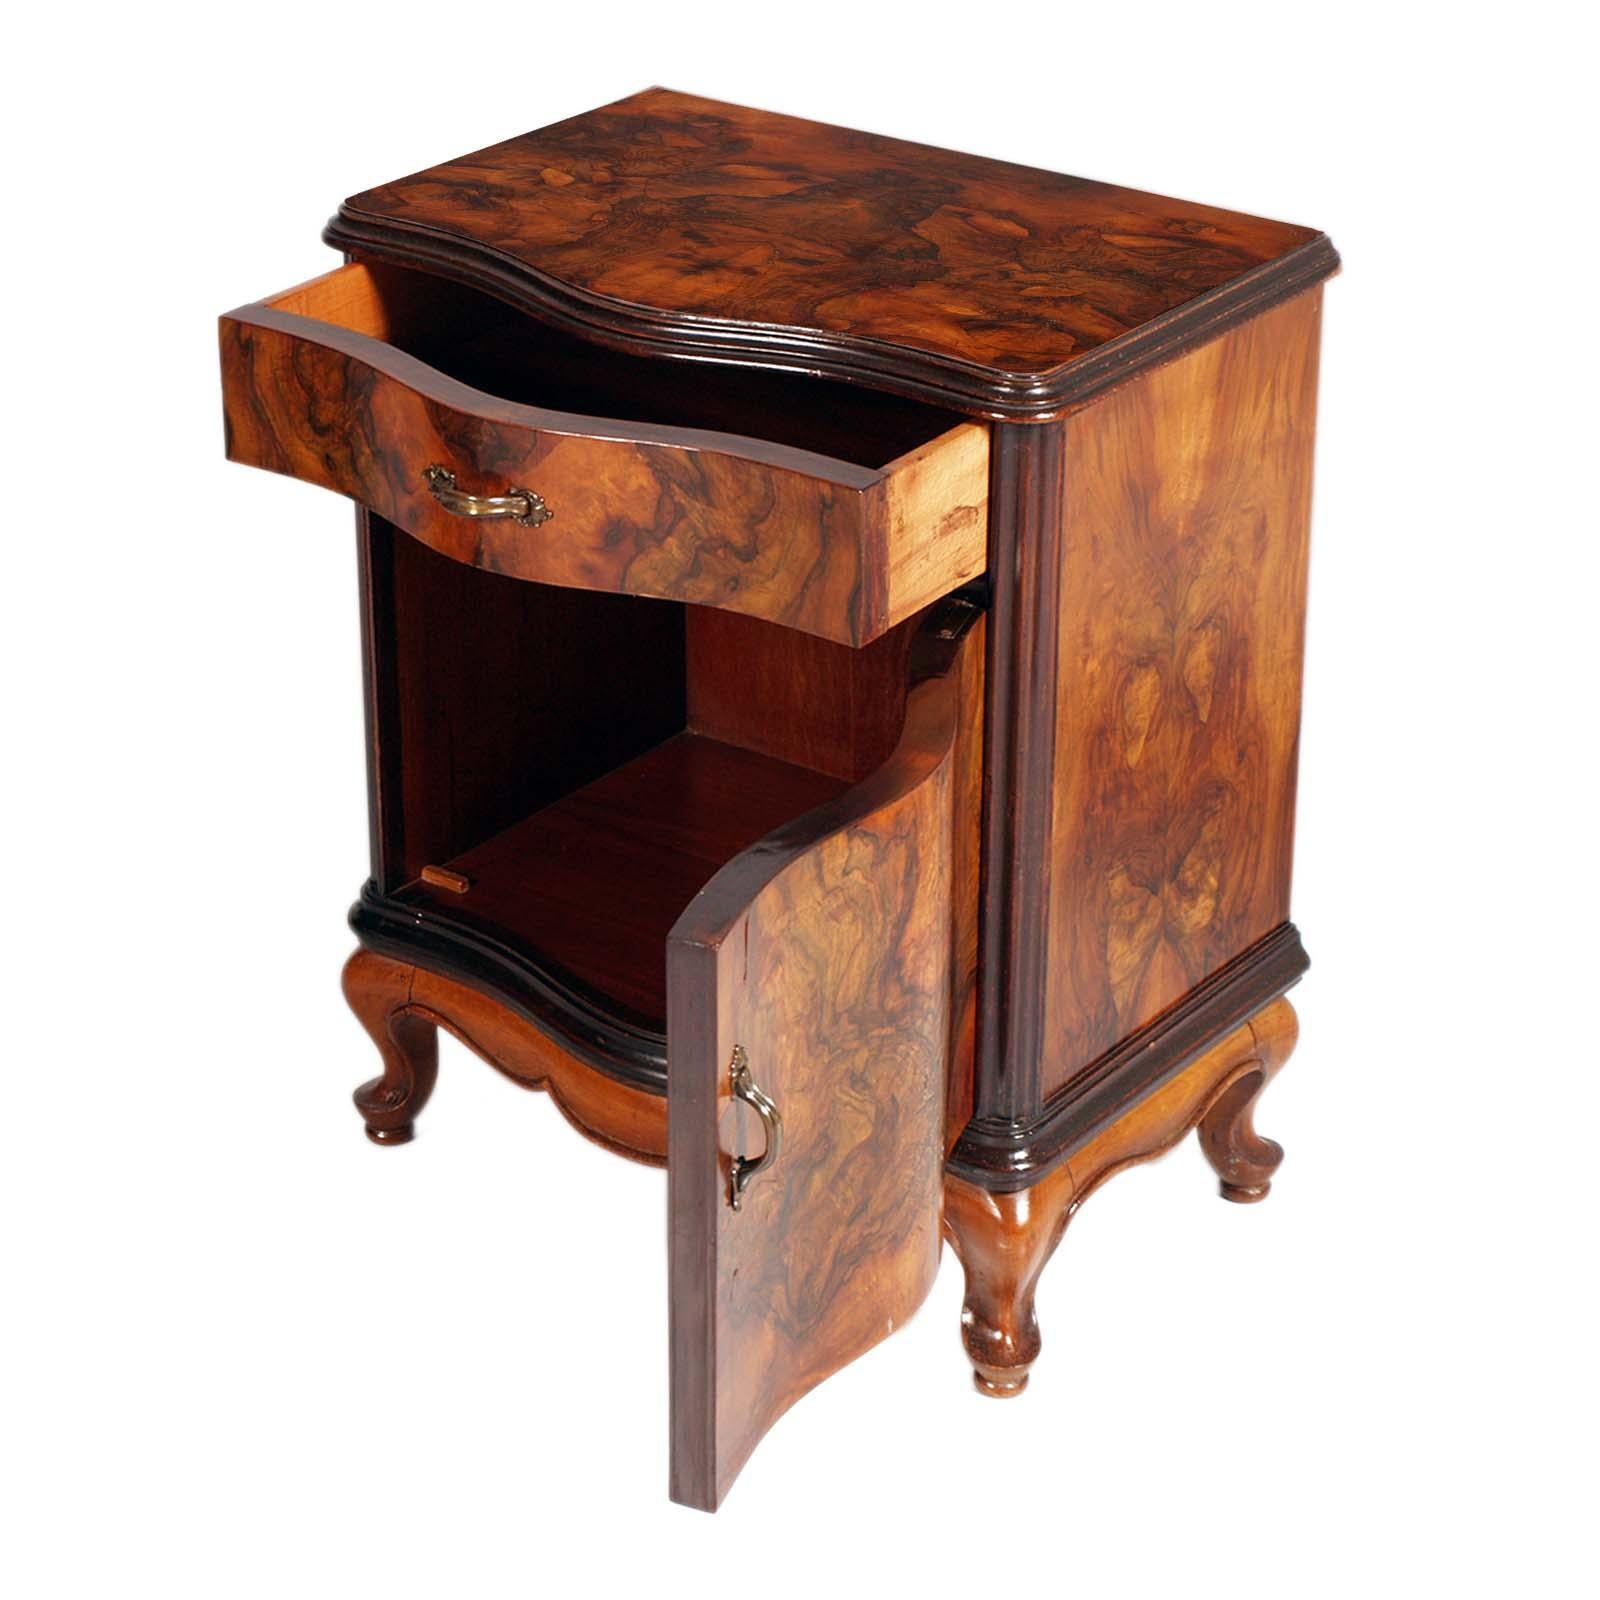 Venice Baroque bedside tables by Testolini Freres, Bella Epoque period, walnut and briar with burnished bronze handles, mahogany interior. Wax polished